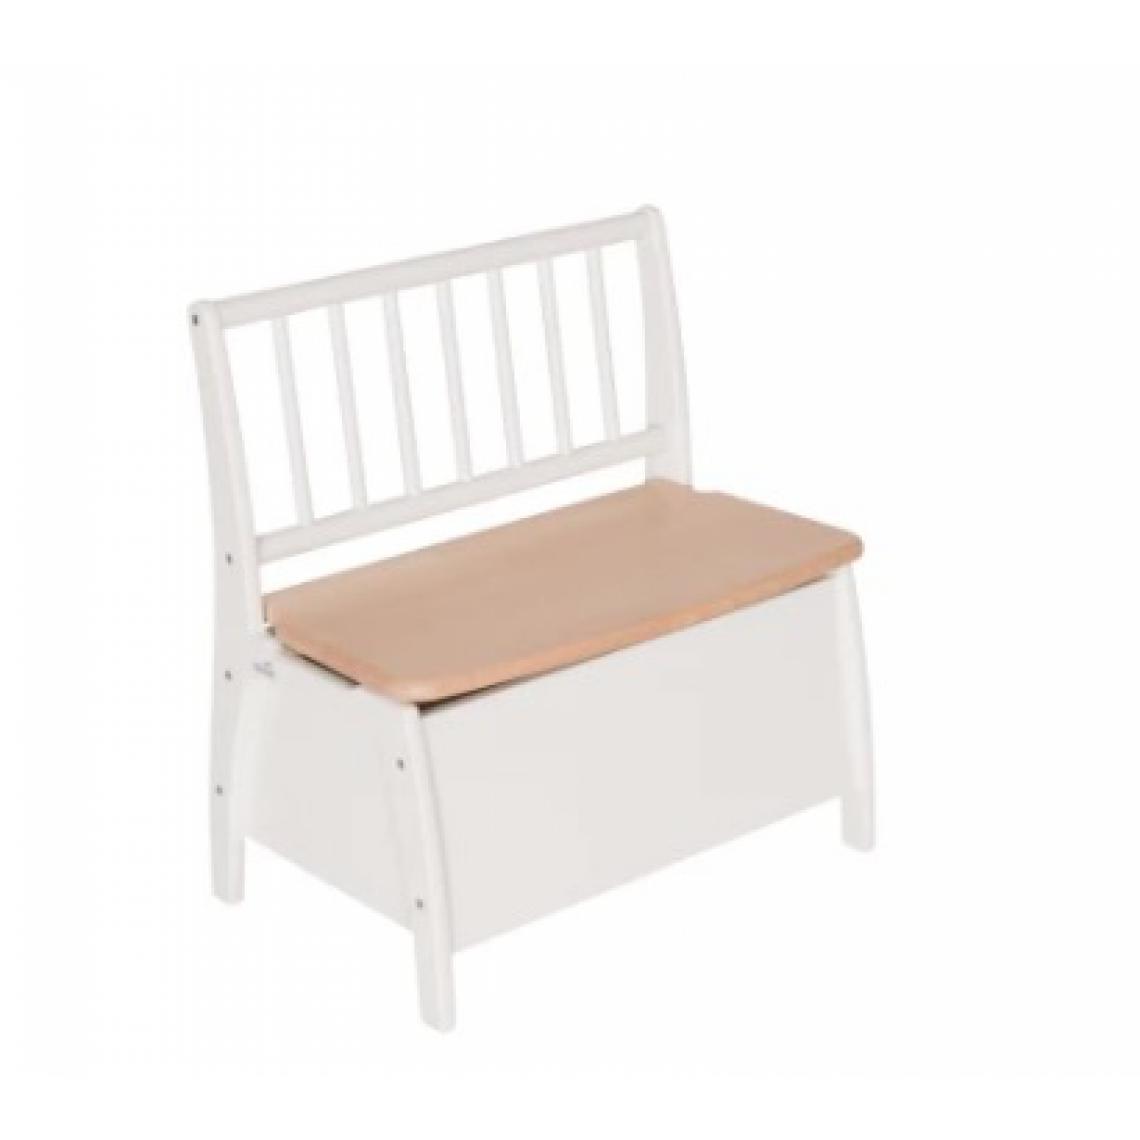 Geuther - Geuther Banc Coffre bois BAMBINO Couleur Blanc - Malles, coffres